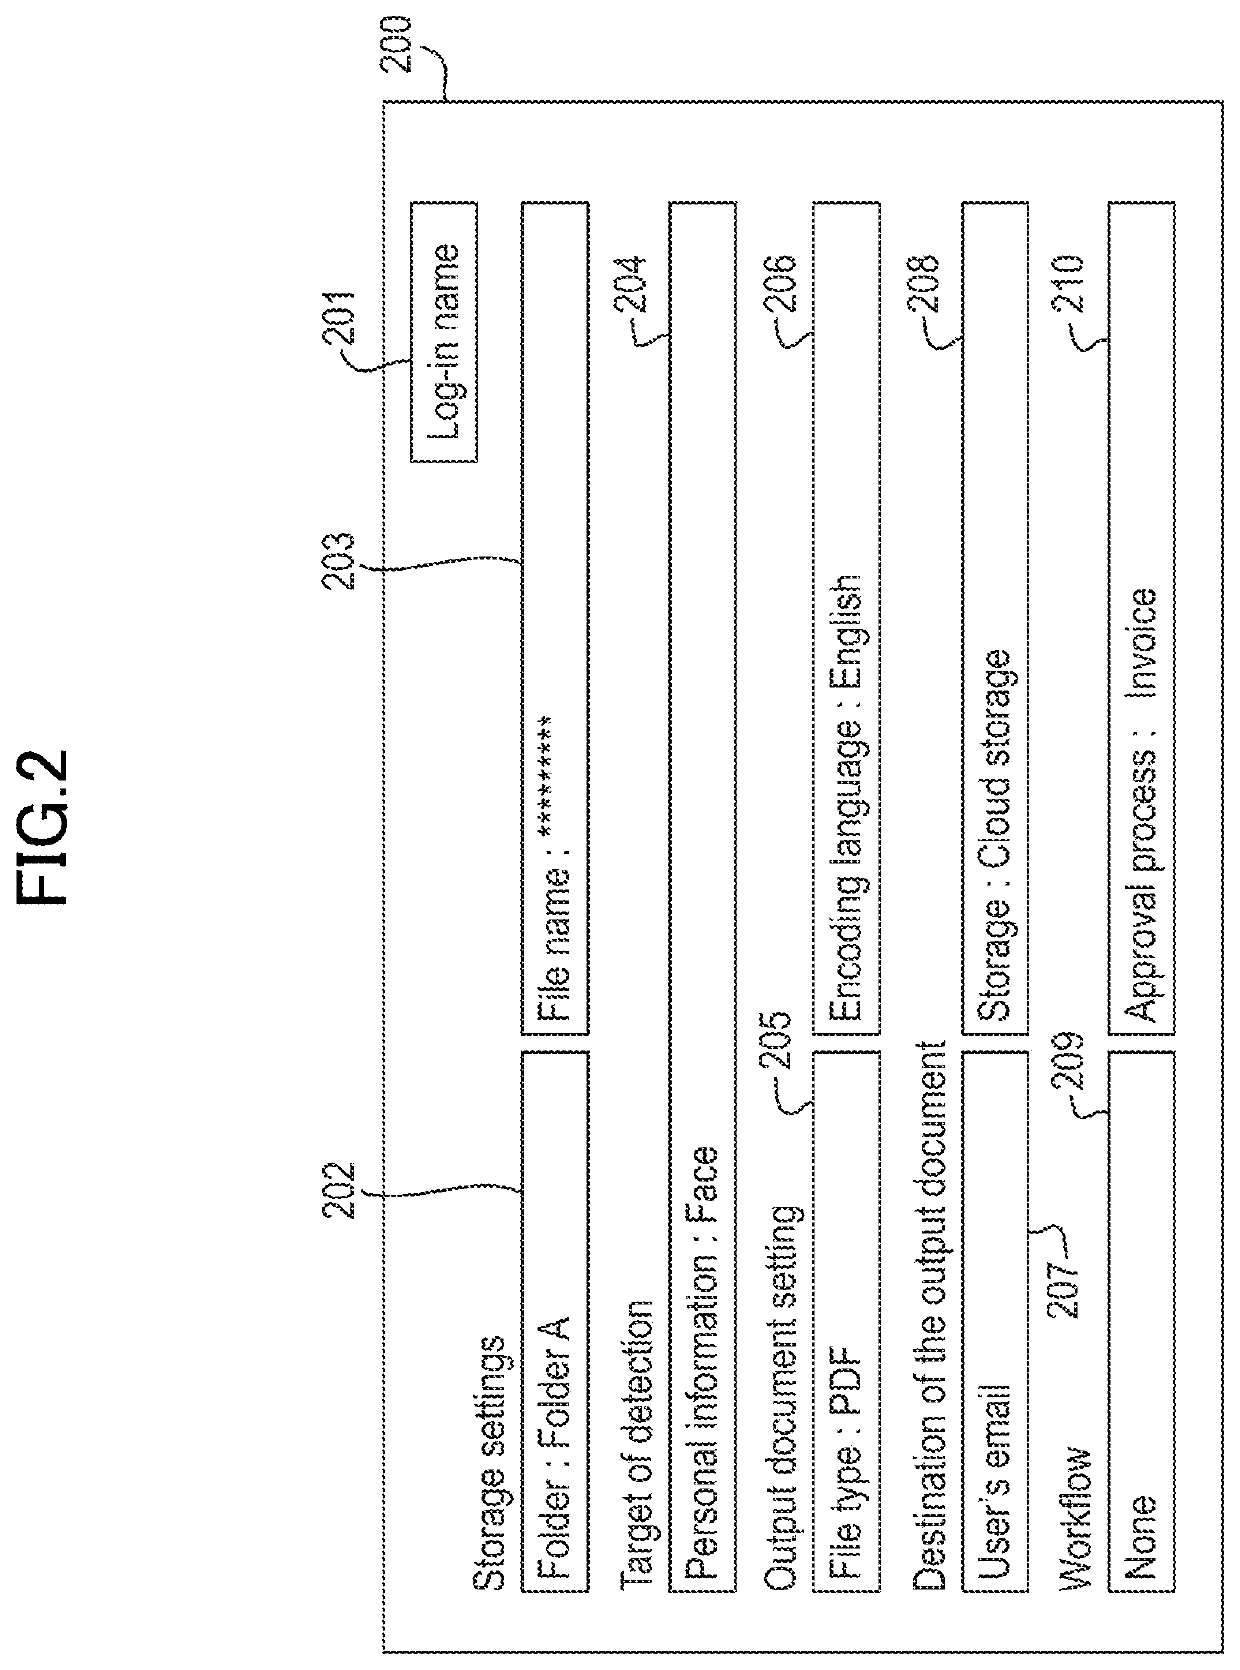 Method and apparatus for document processing